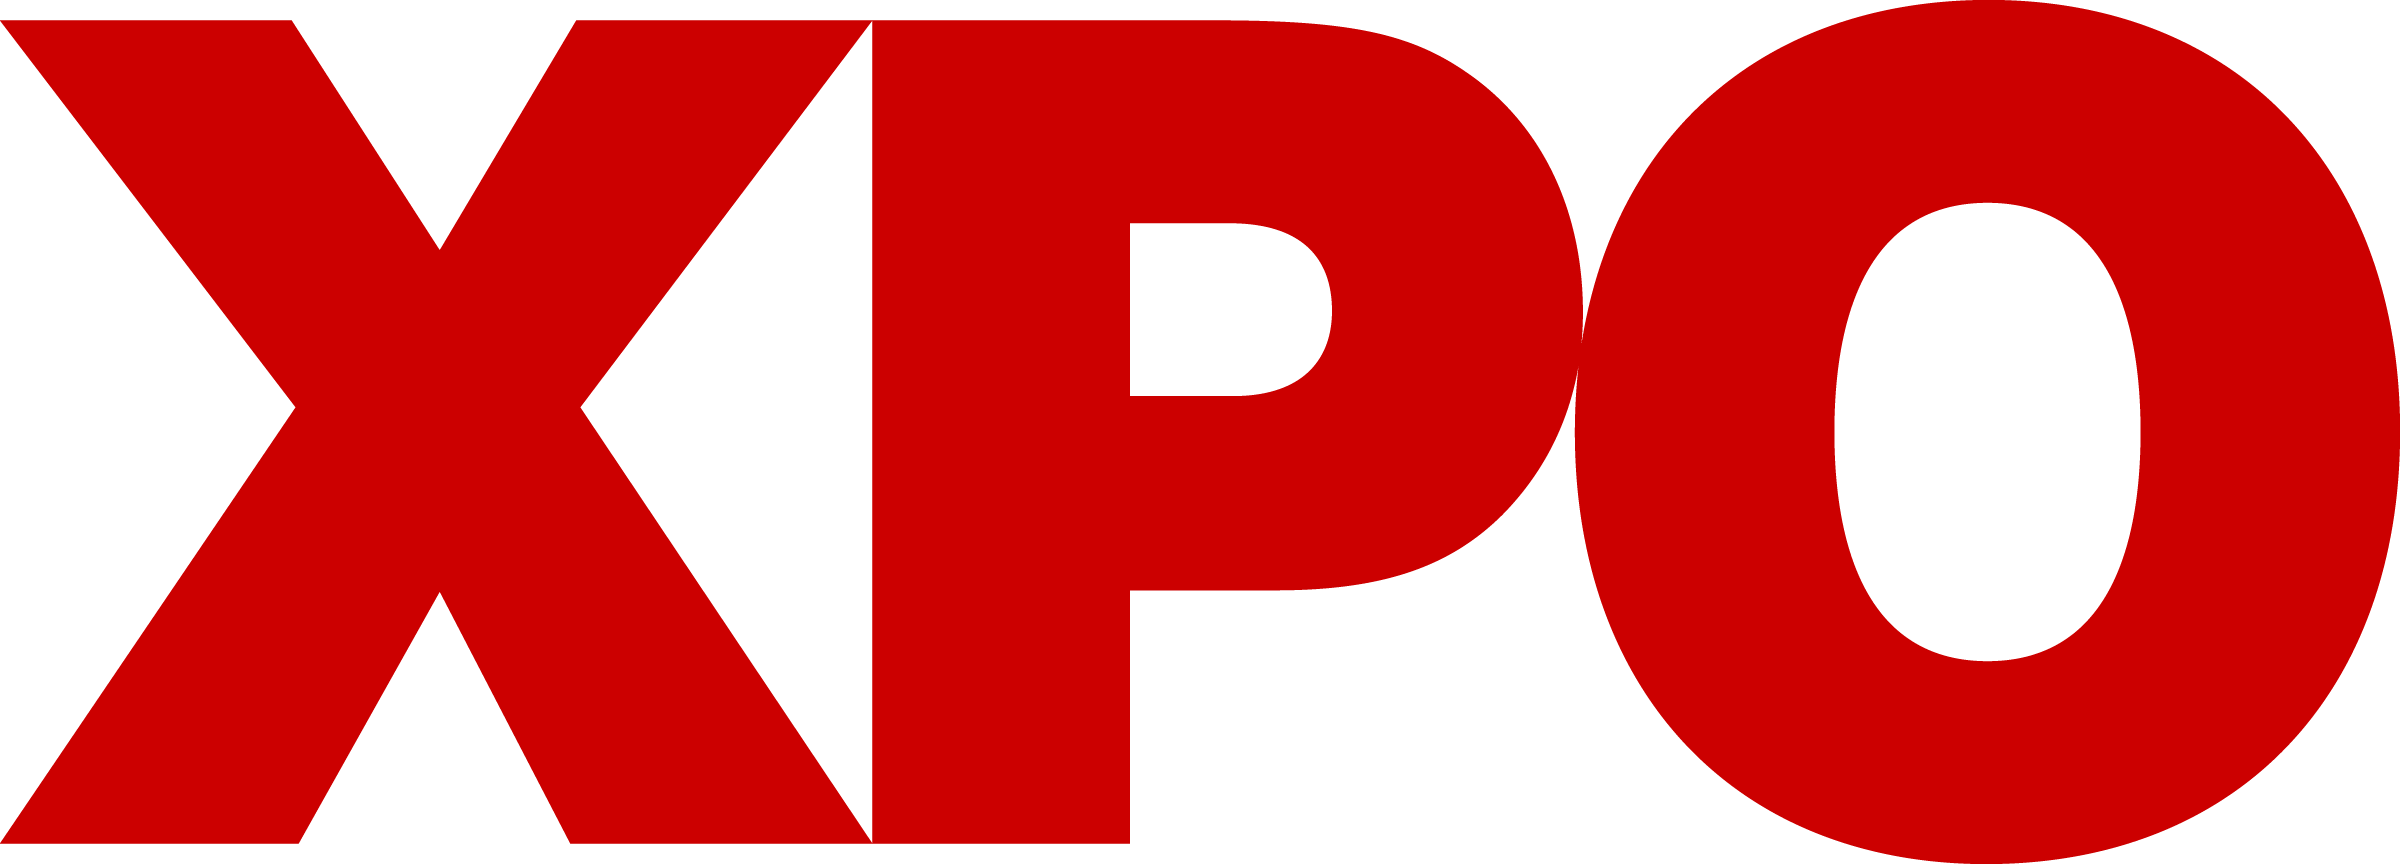 XPO Named a 2024 FreightTech 100 Company by FreightWaves 378aec62-5d02-4947-a49f-6b239fc7402d?size=1